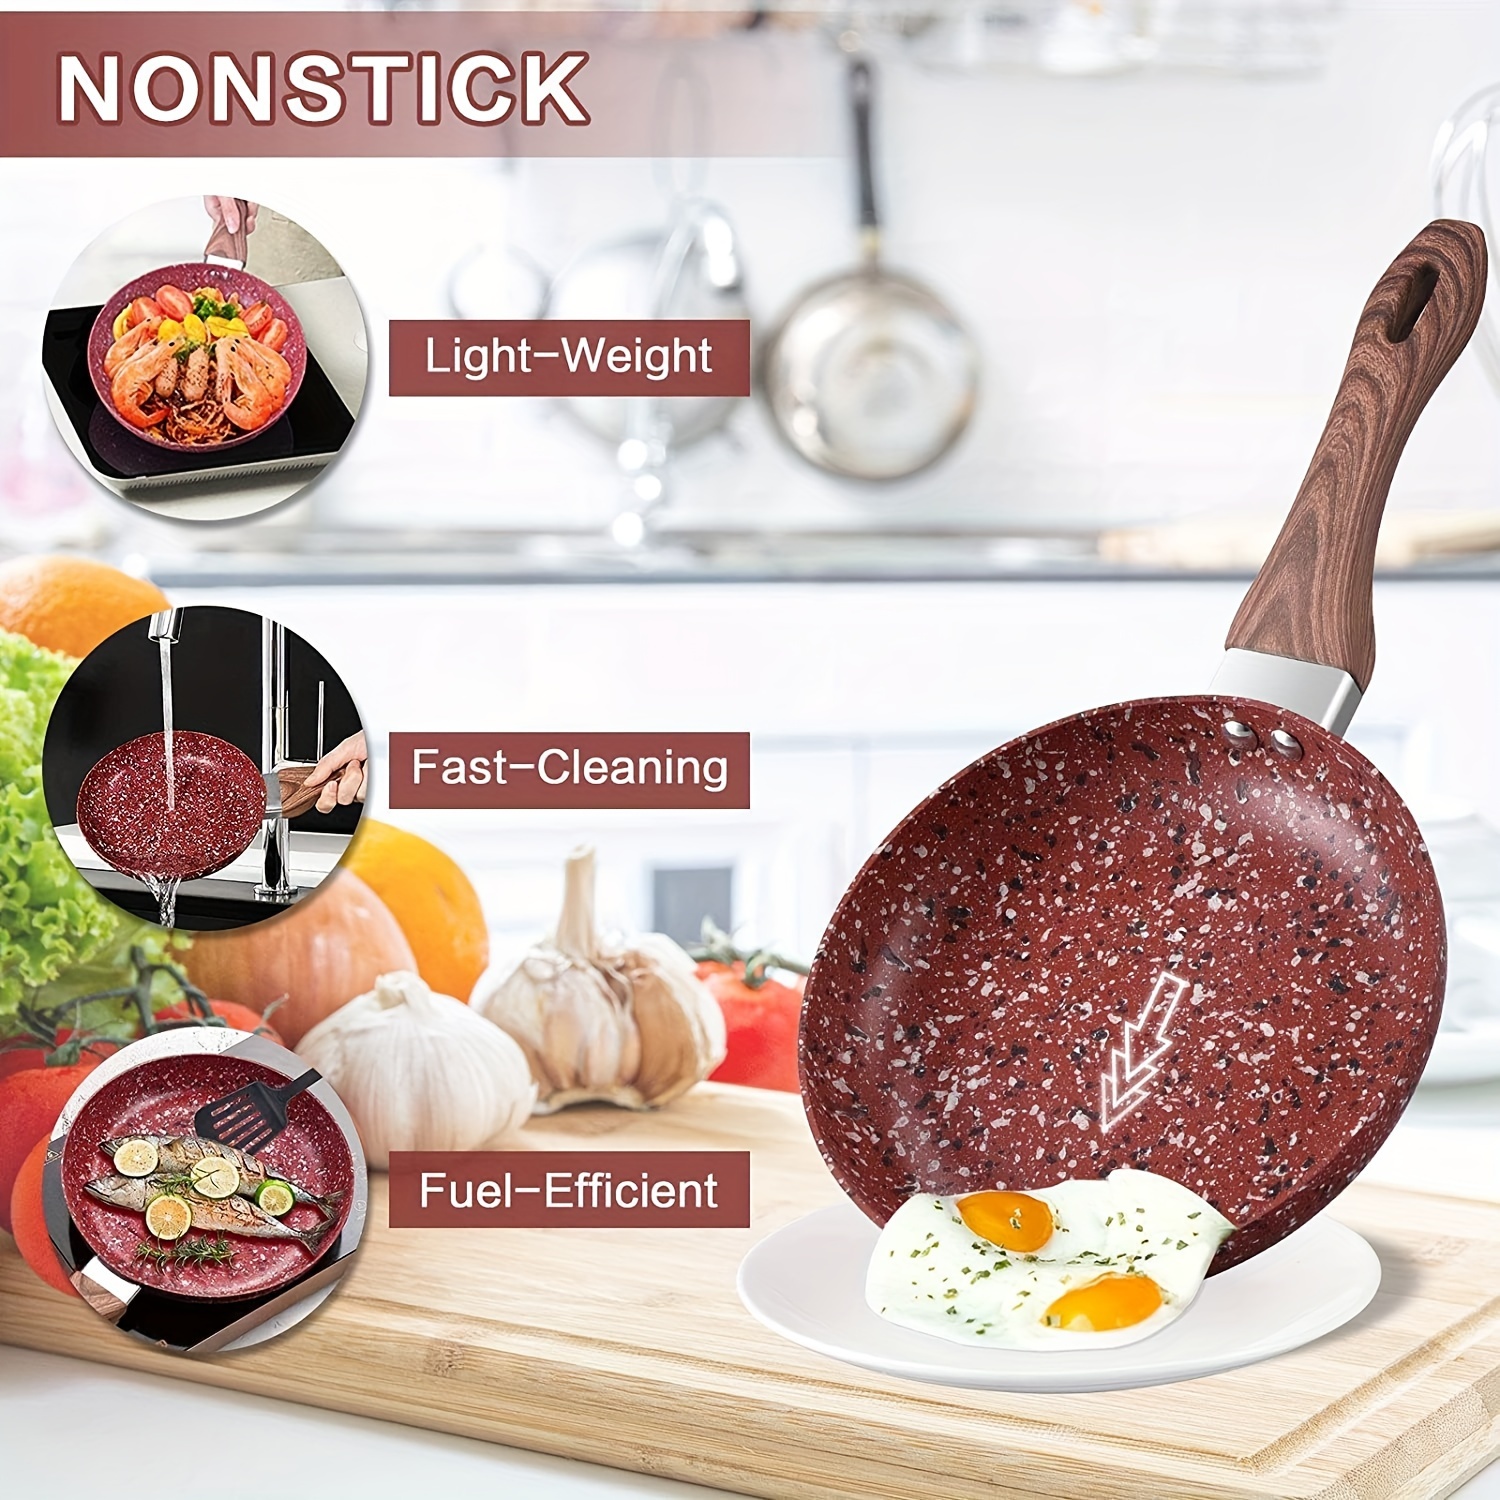 KOCH SYSTEME CS CSK 11+12in Nonstick Frying Pan Sets With Glass Lids- Cookware